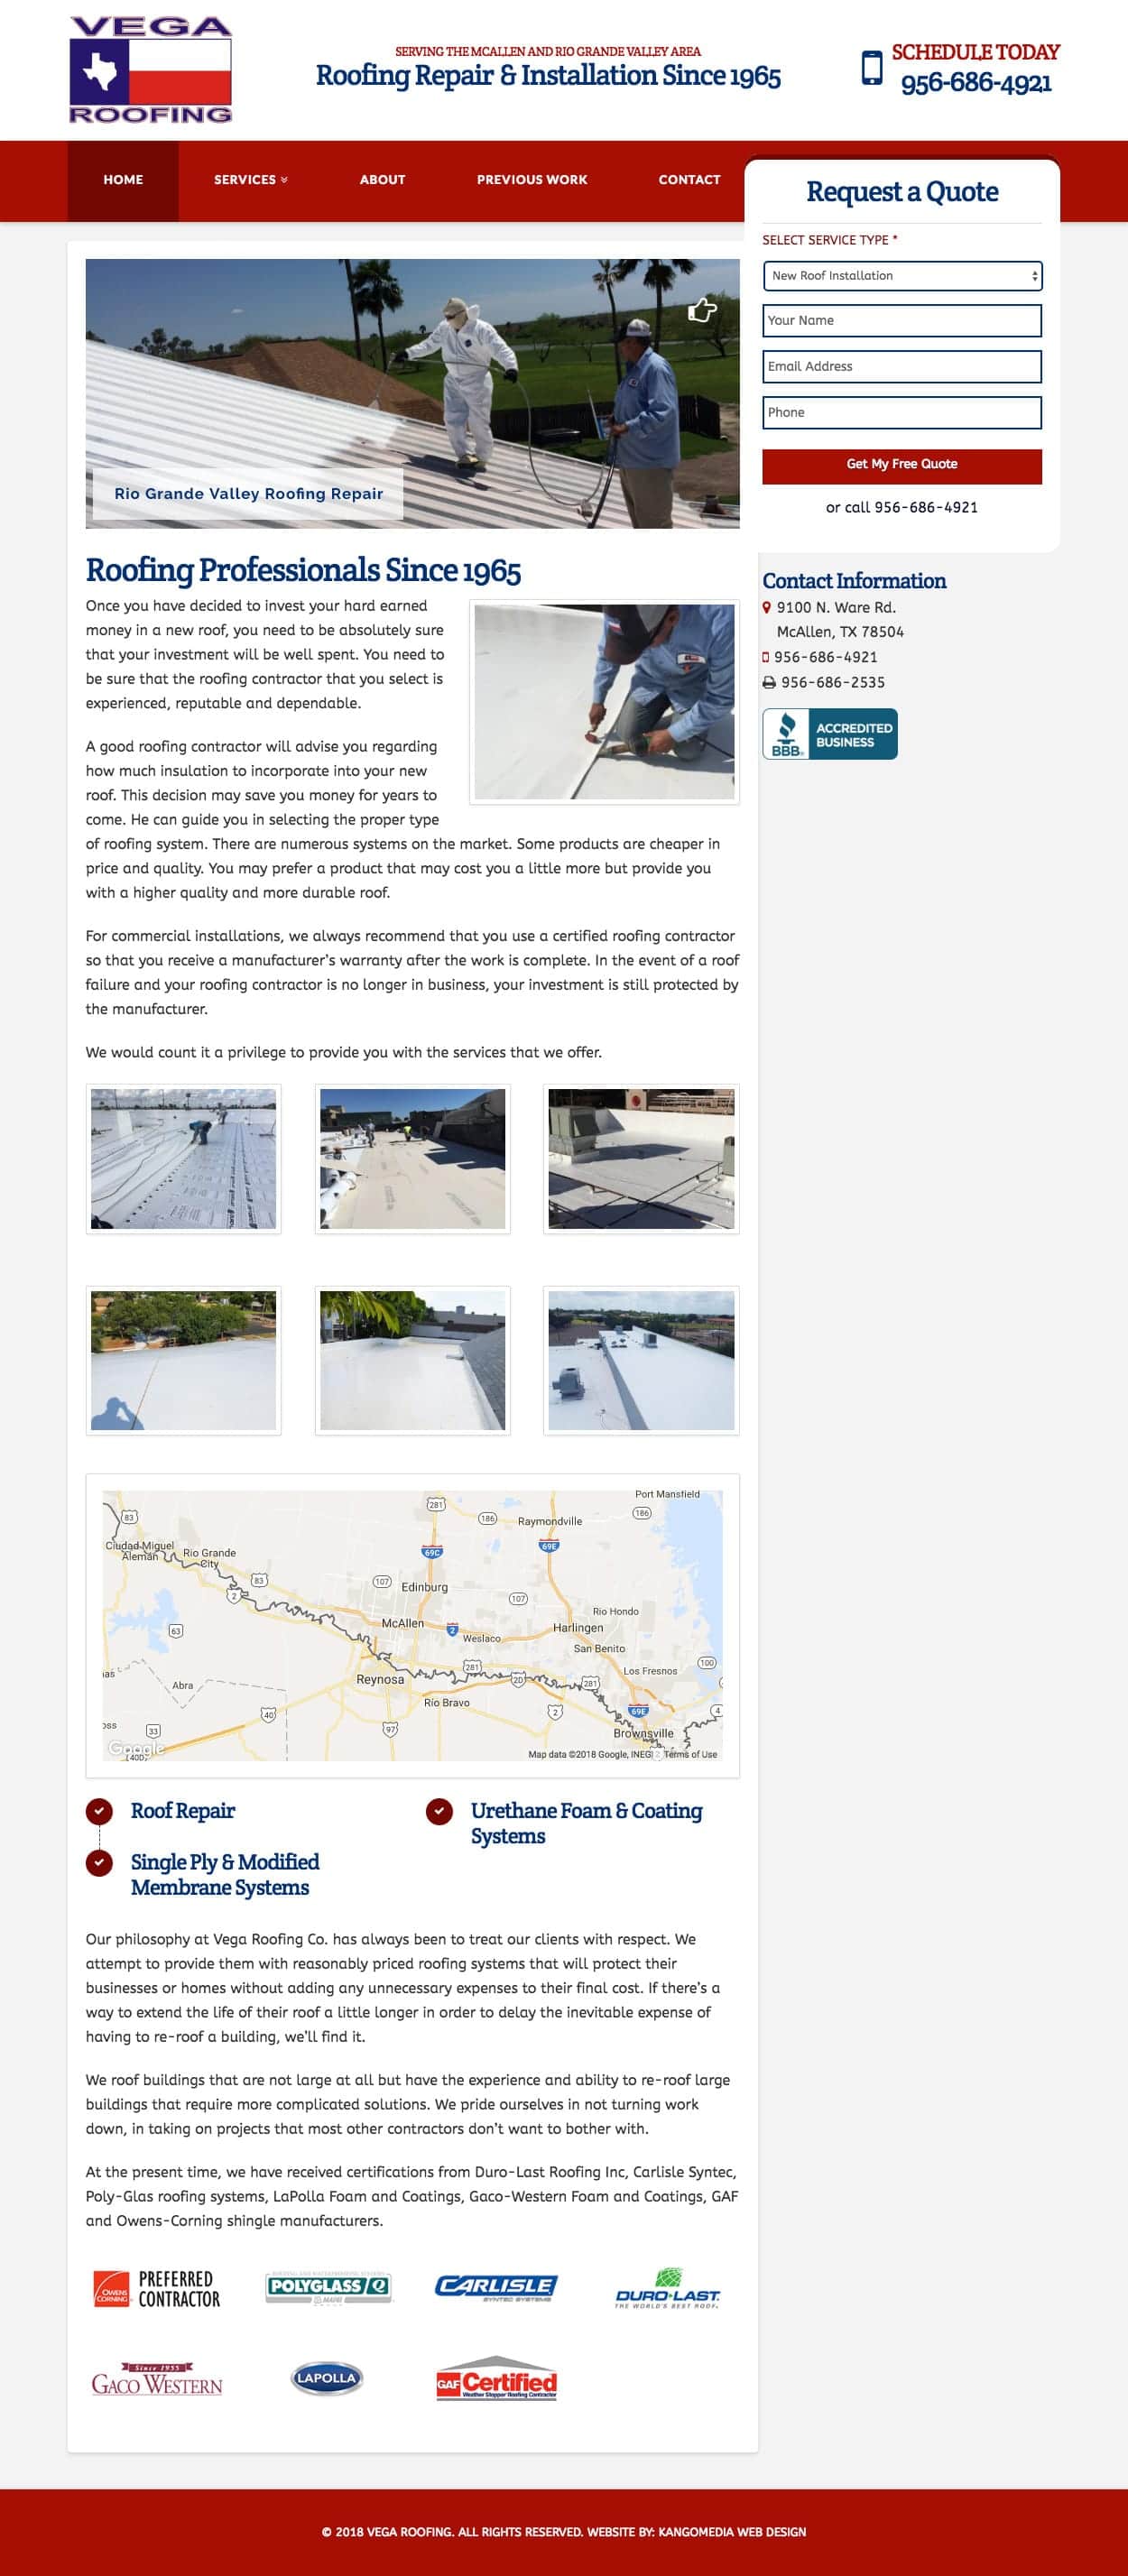 Roofing Company Web Design